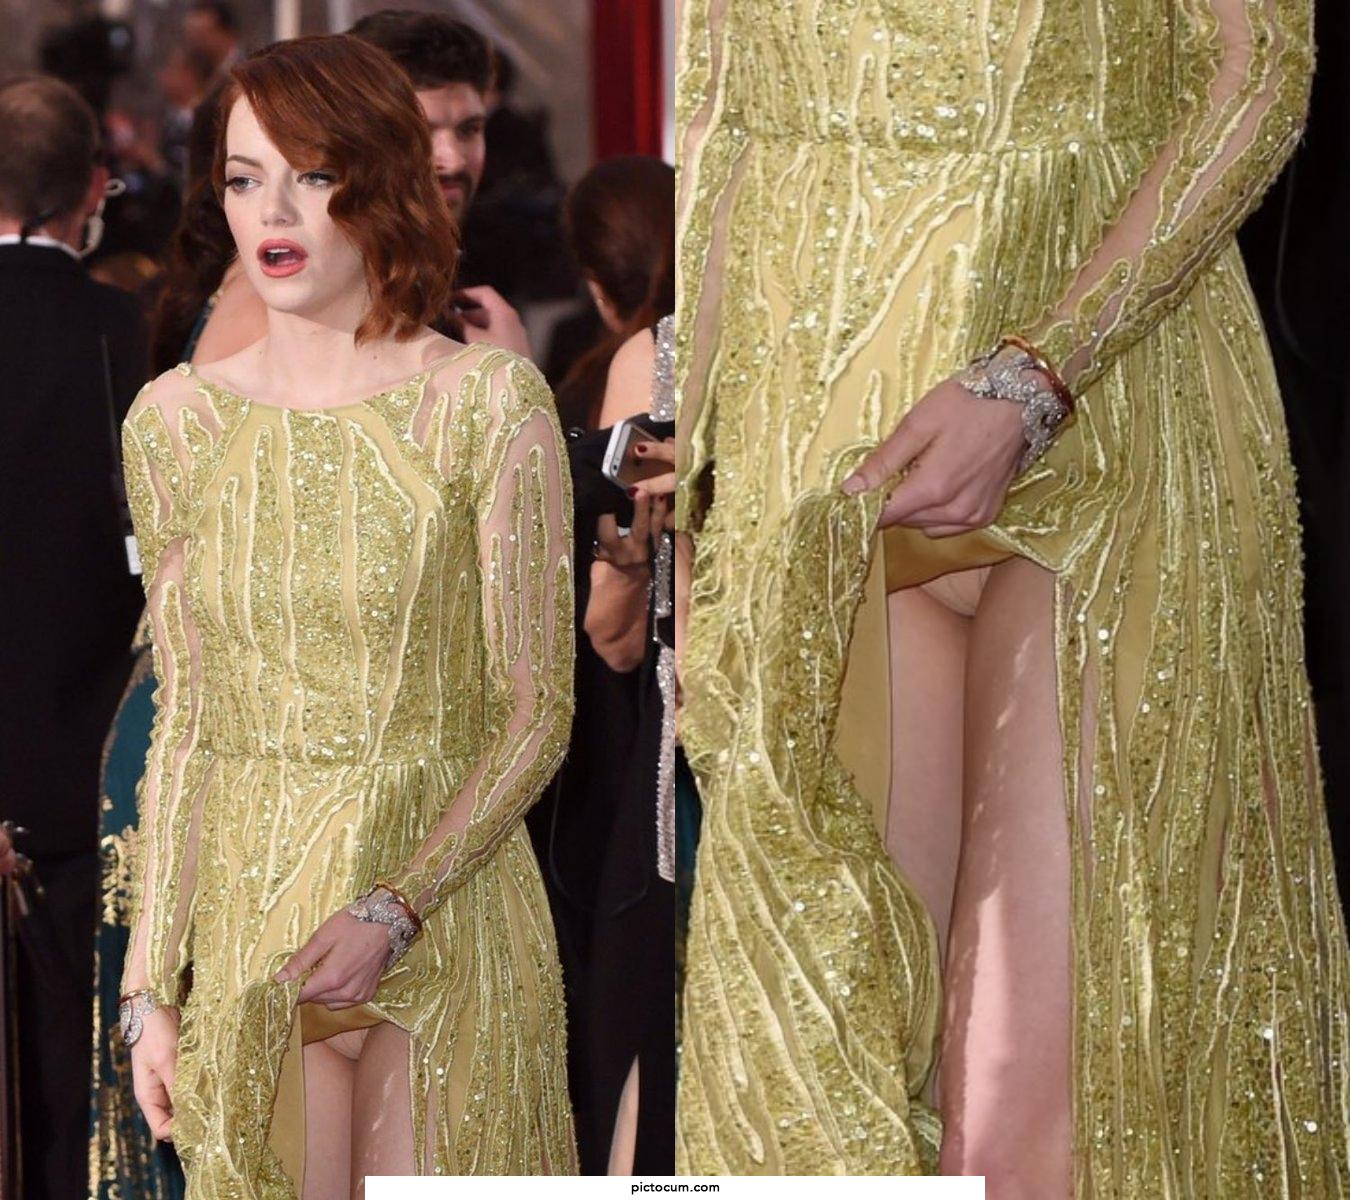 i love to jerk off to Emma Stone's beautiful face and perfect body